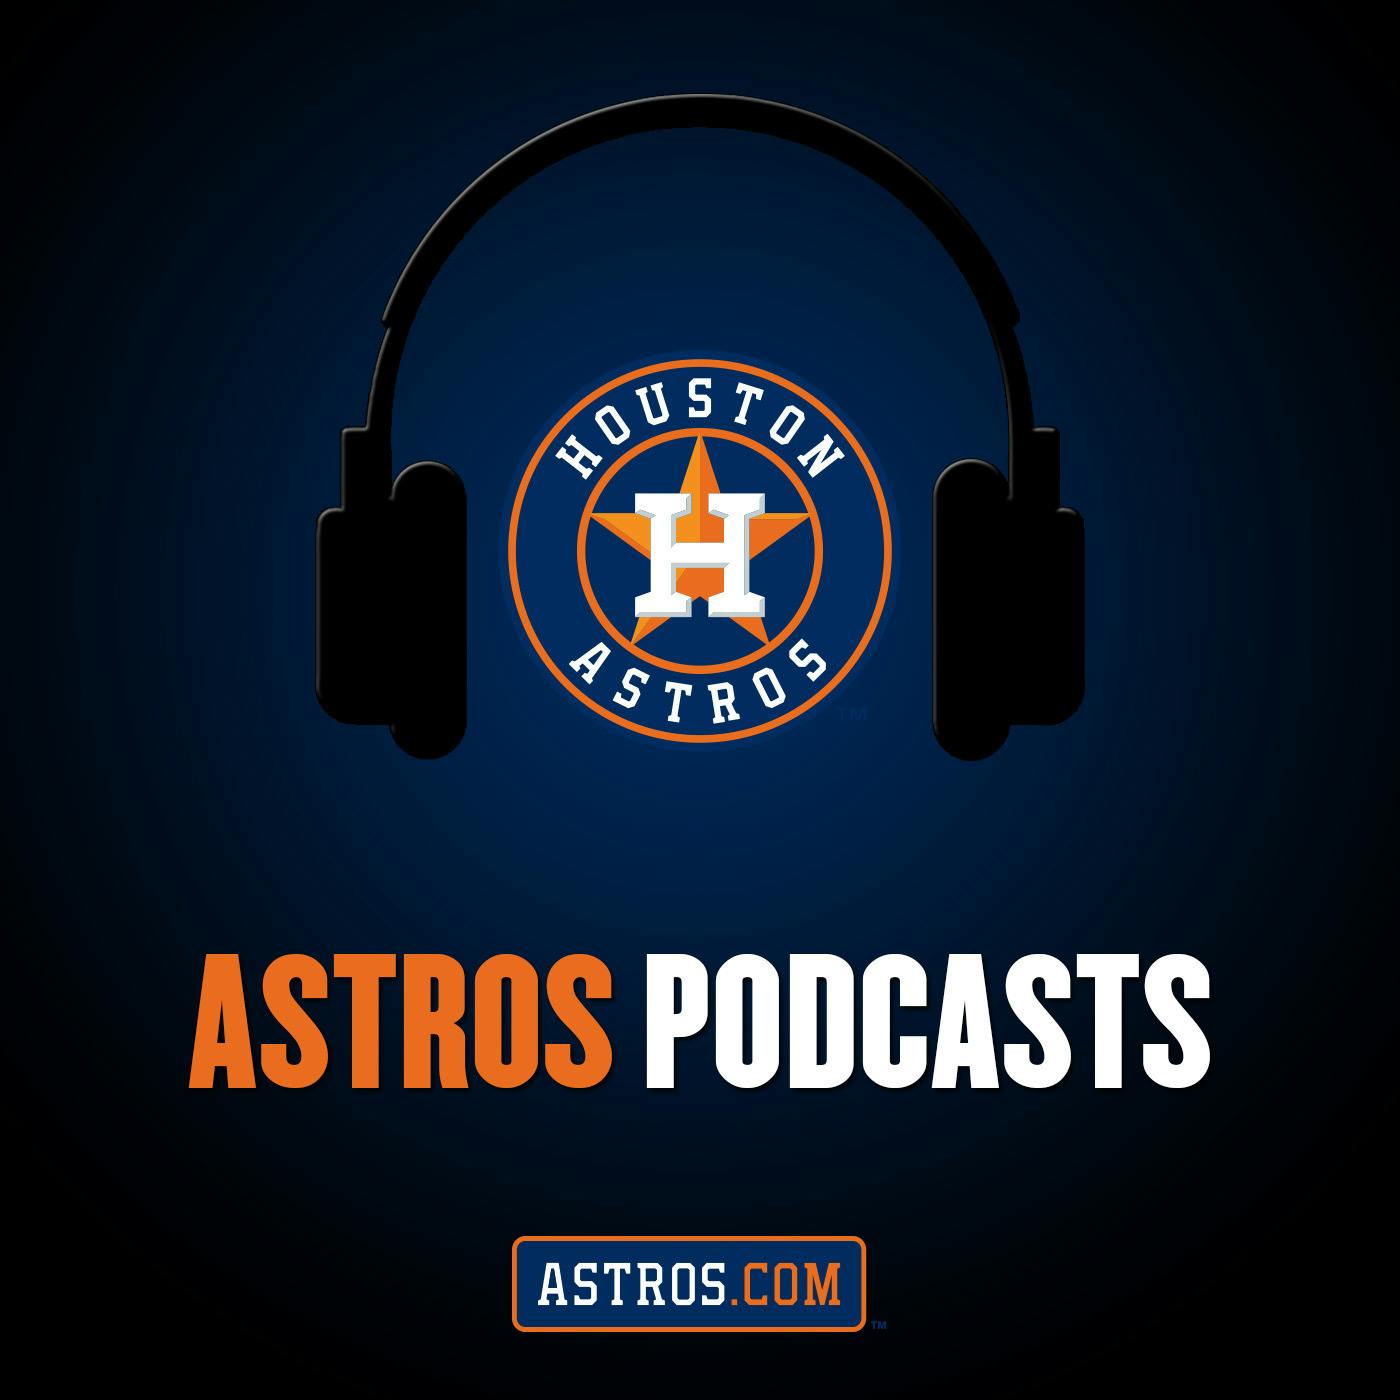 3/20 ASTROLINE presented by Karbach Brewing: Podcast featuring Robert Ford, Steve Sparks & Geoff Blum